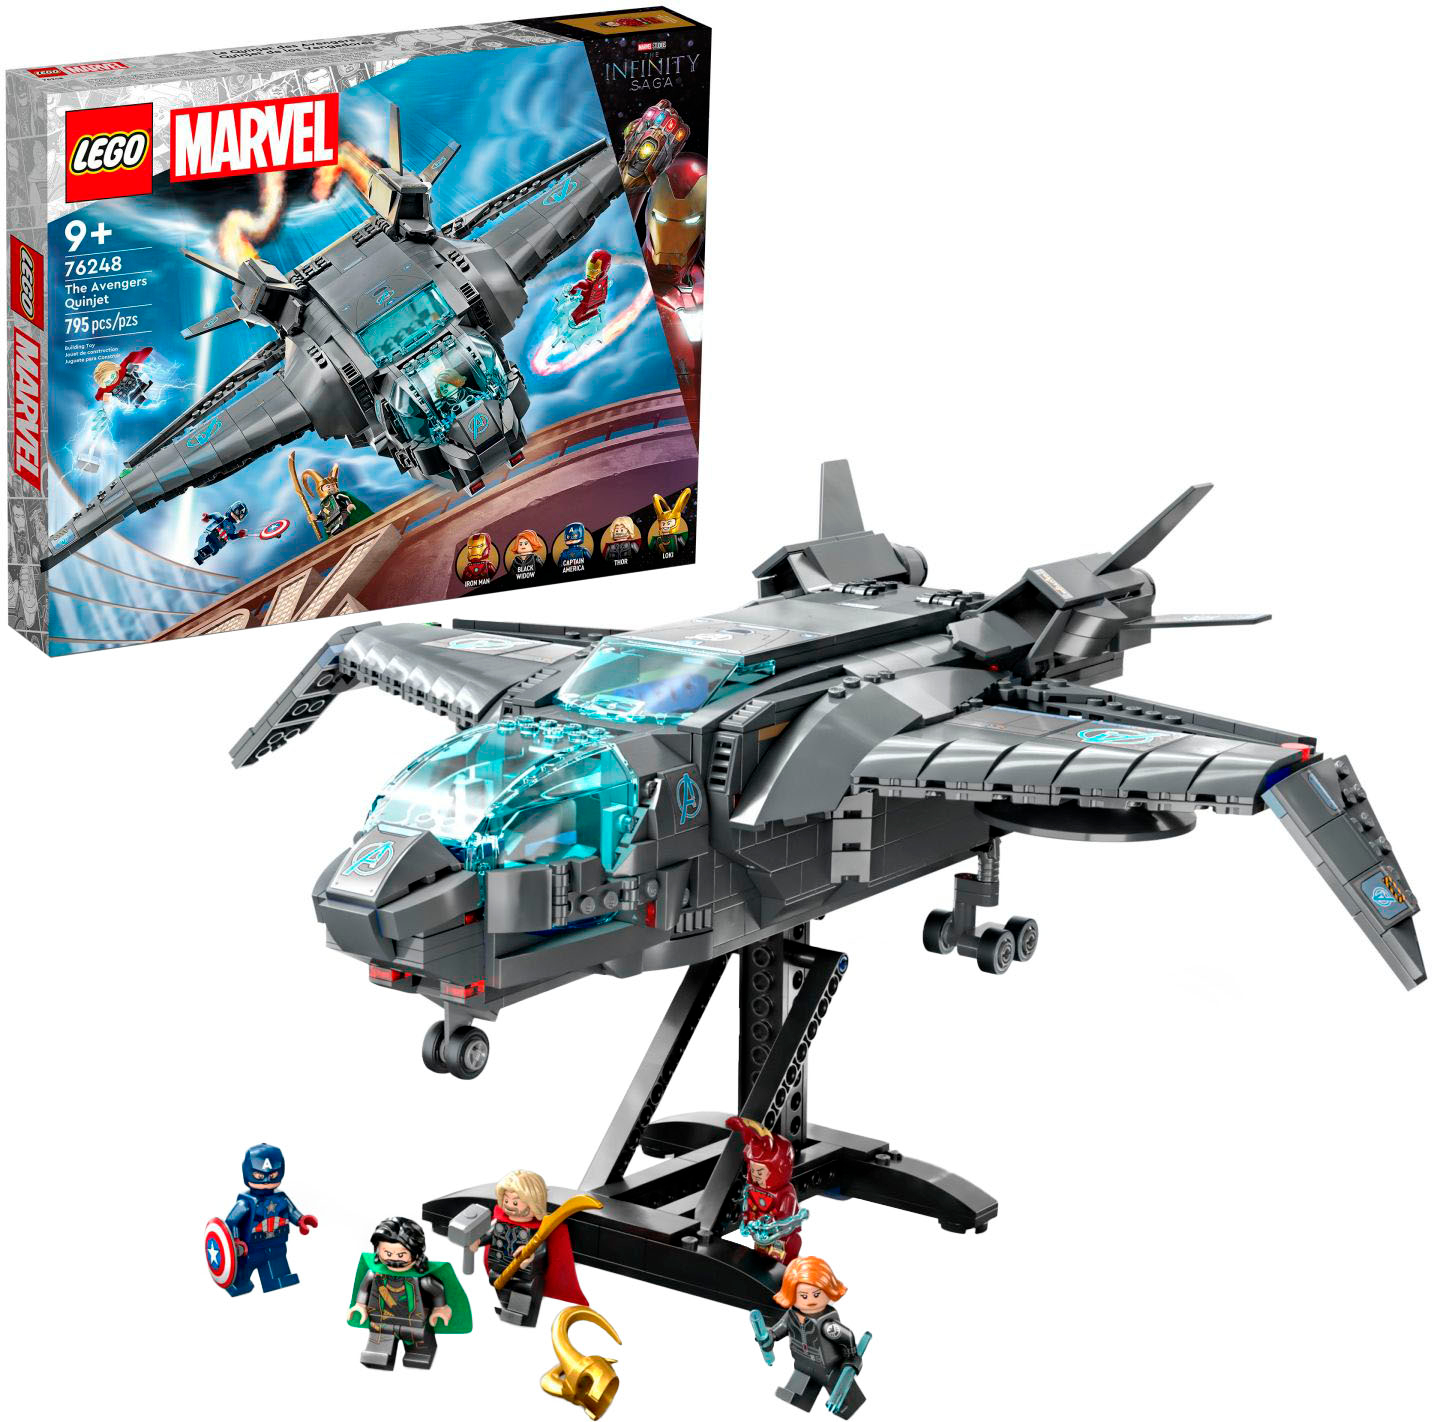 My Best Buy Plus & Total Members: 30% Off Select LEGO: 1810-Piece Hokusai The Great Wave $69.99, 4167-Piece Jim Lee Batman Collection $83.99 & More + Free Shipping